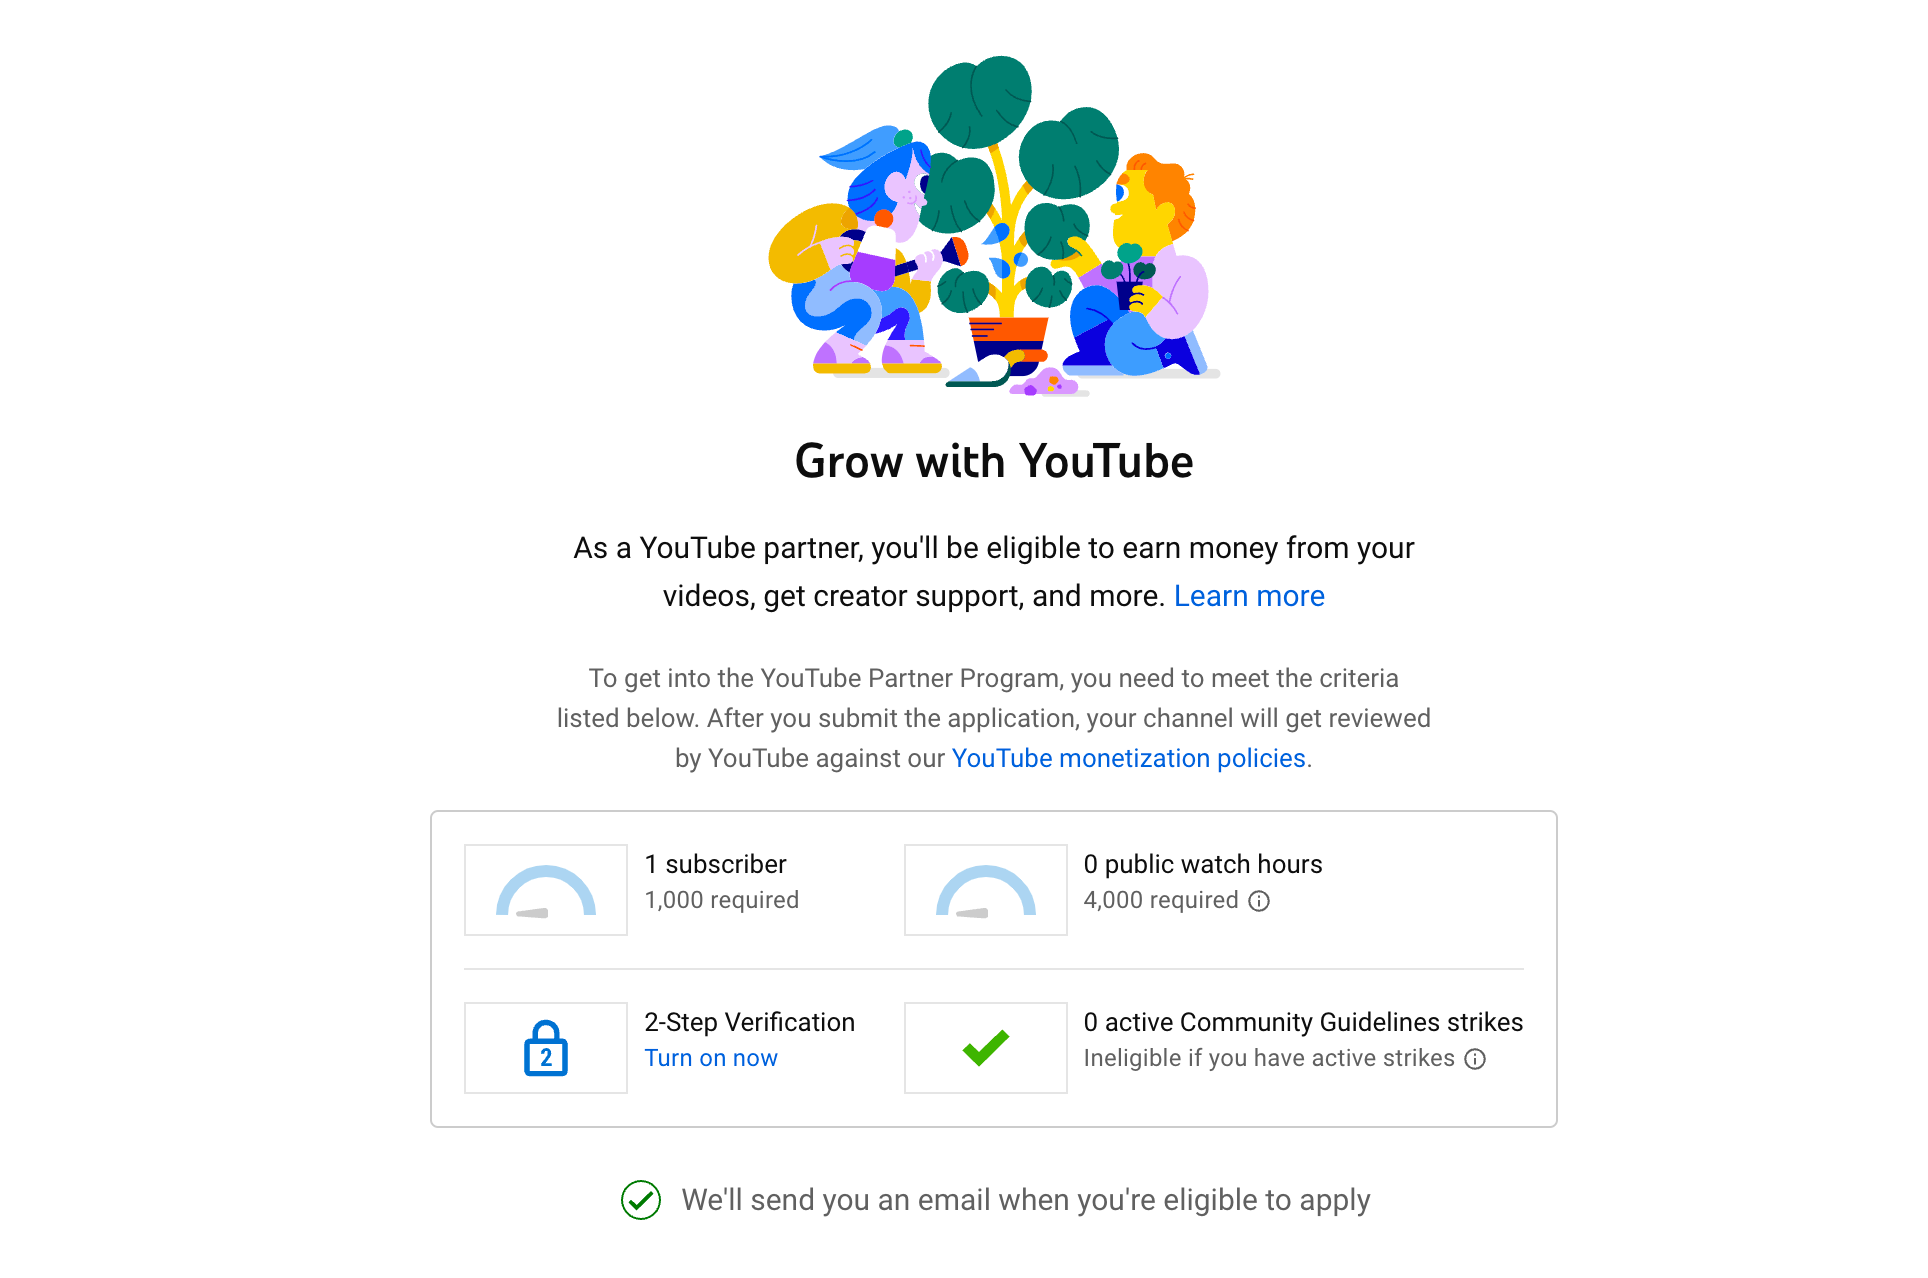 Screenshot inviting YouTubers to join the YouTube Partner Program